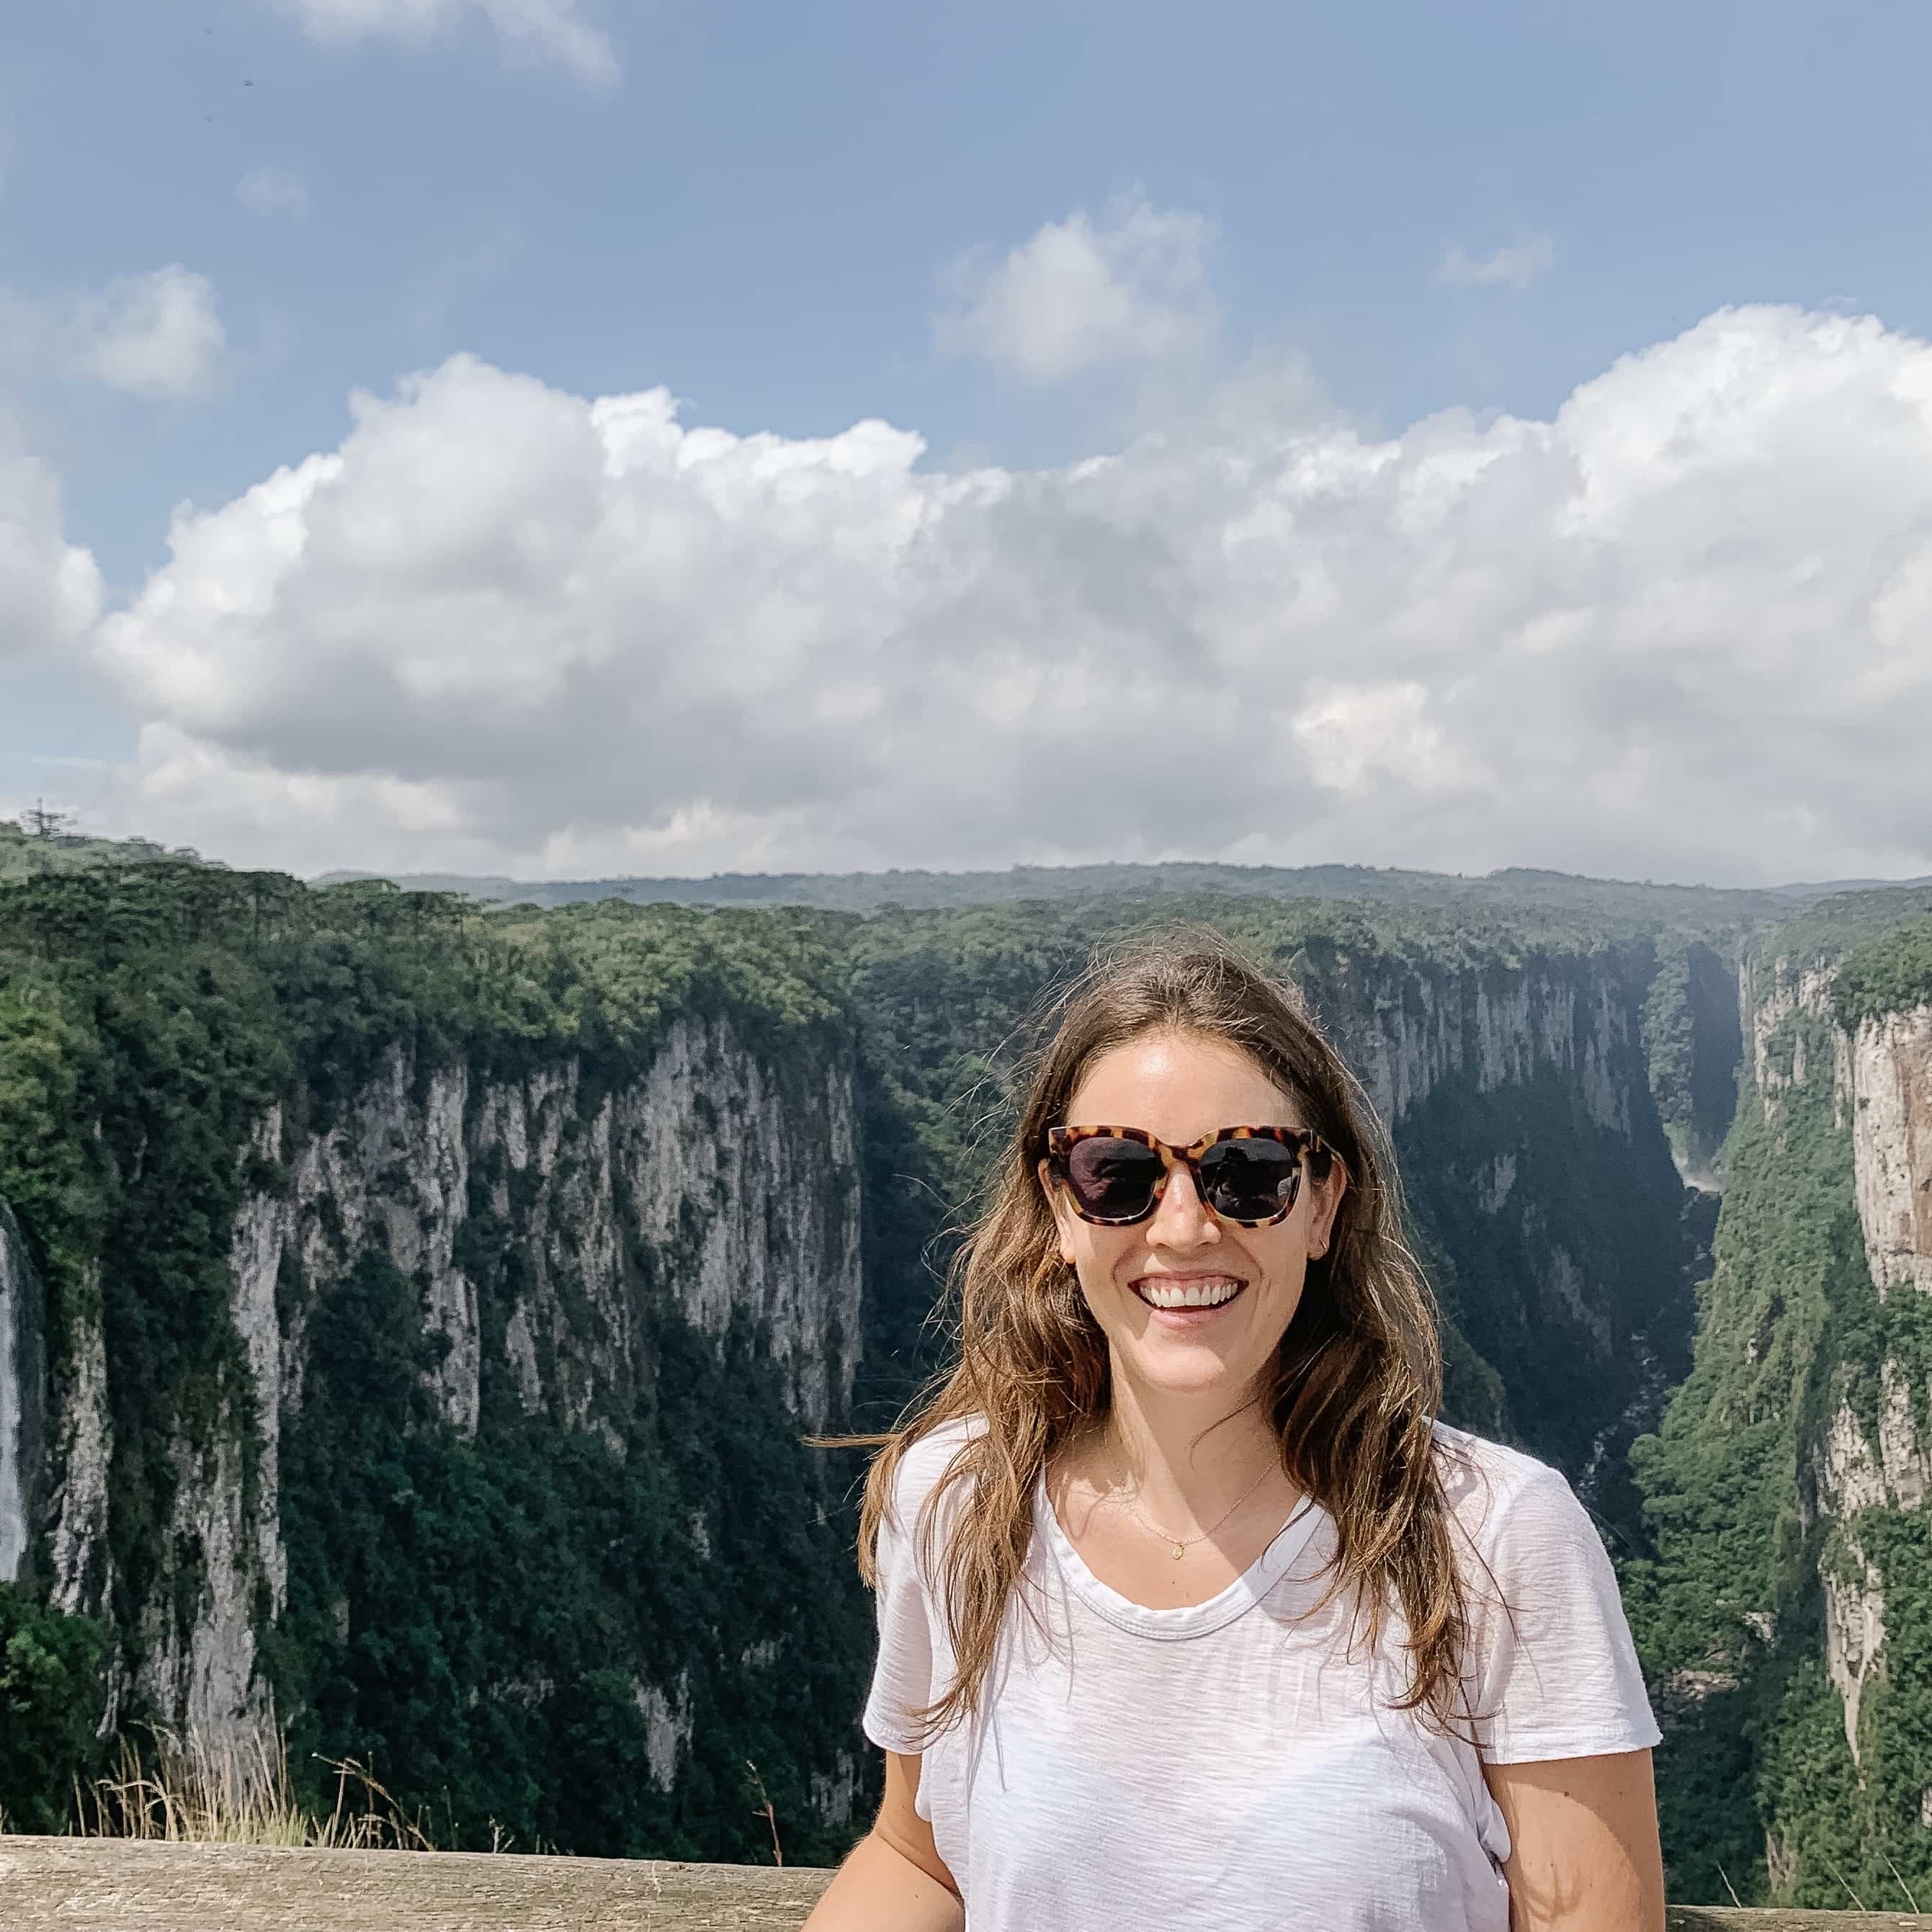 Emma standing in front of a canyon